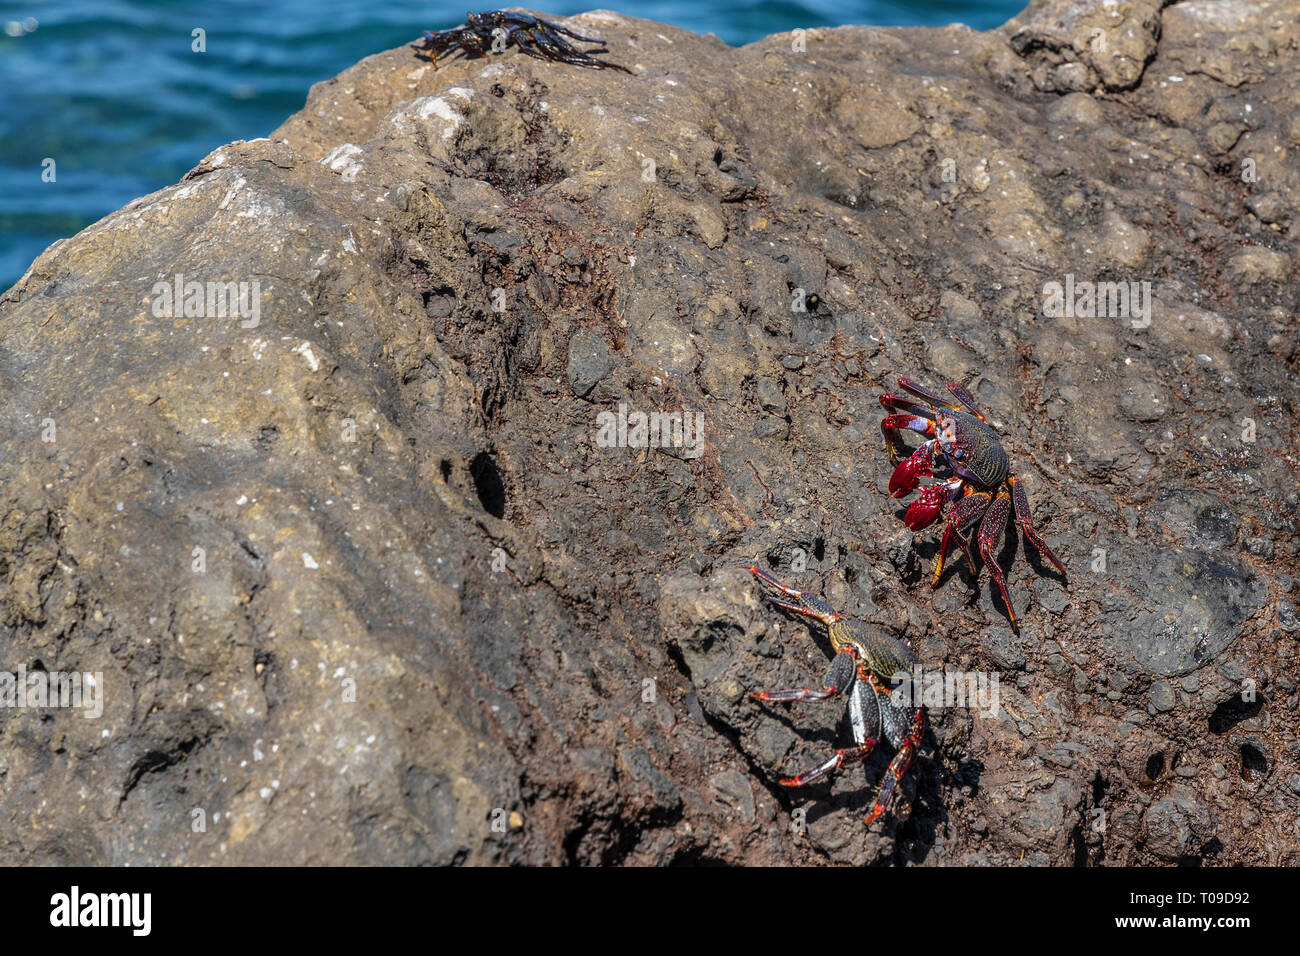 Grapsus grapsus adscensionis, red crab living on rocks along the west coast of Tenerife, Canary Islands, Spain Stock Photo